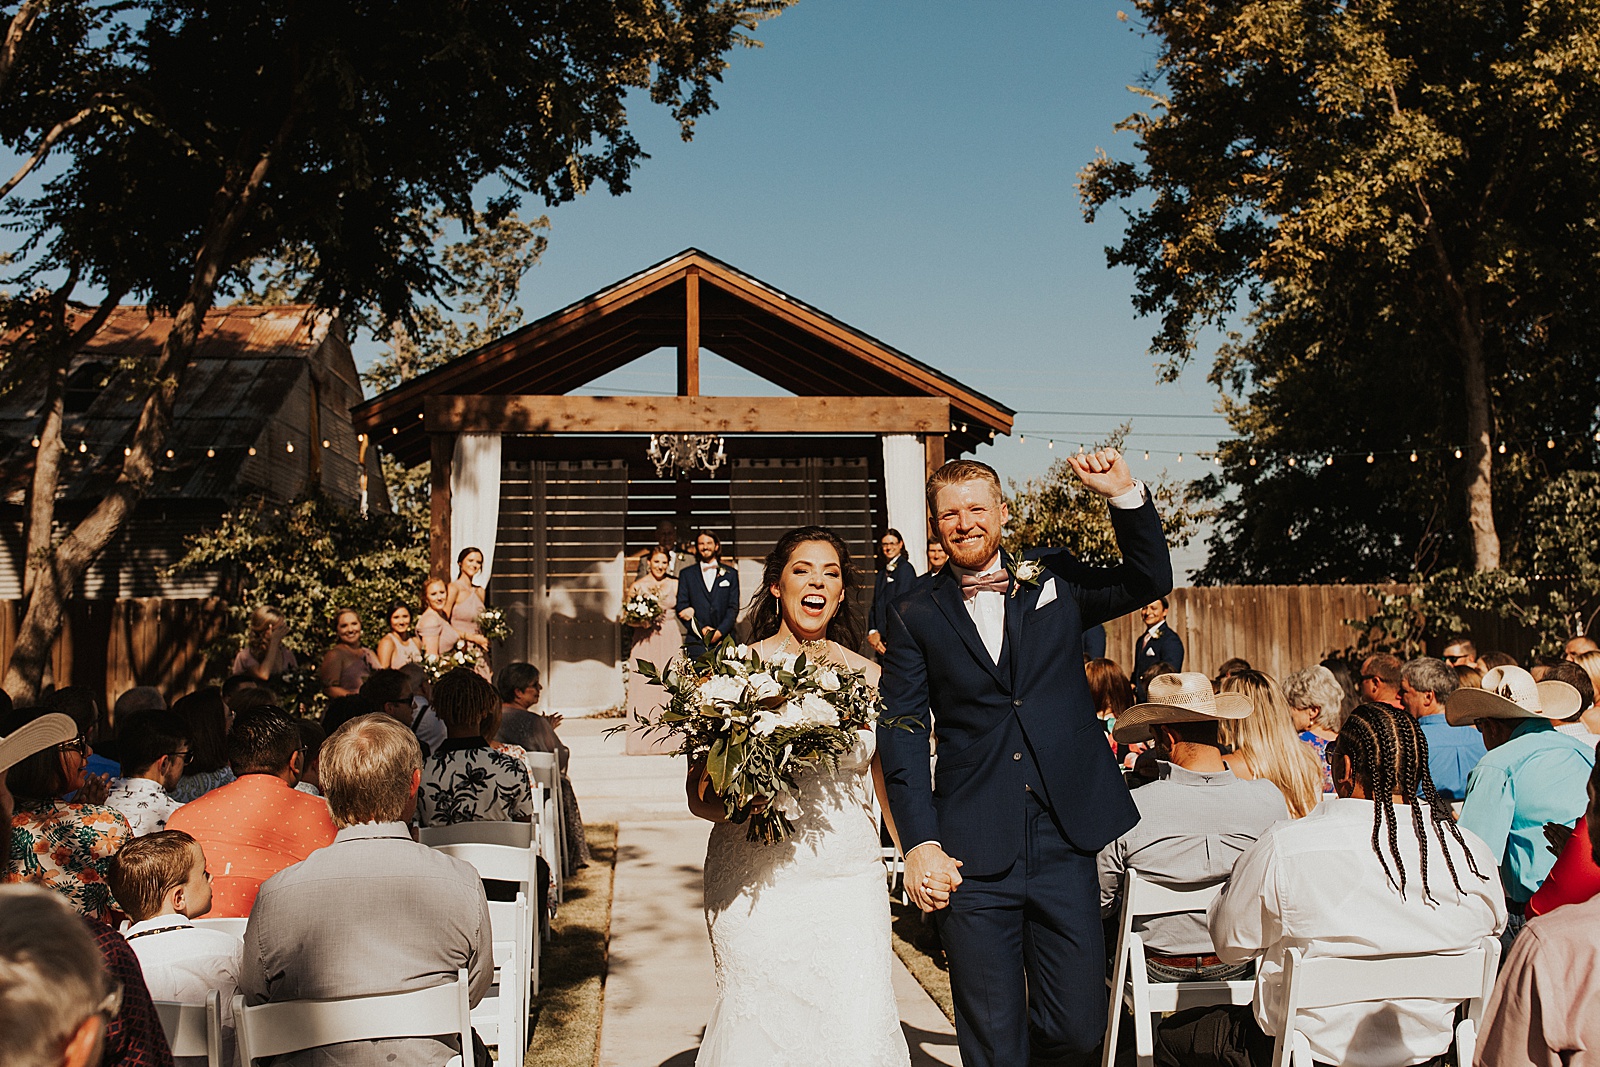 An outdoor ceremony wedding photo at the Soda District Courtyard in Abilene.